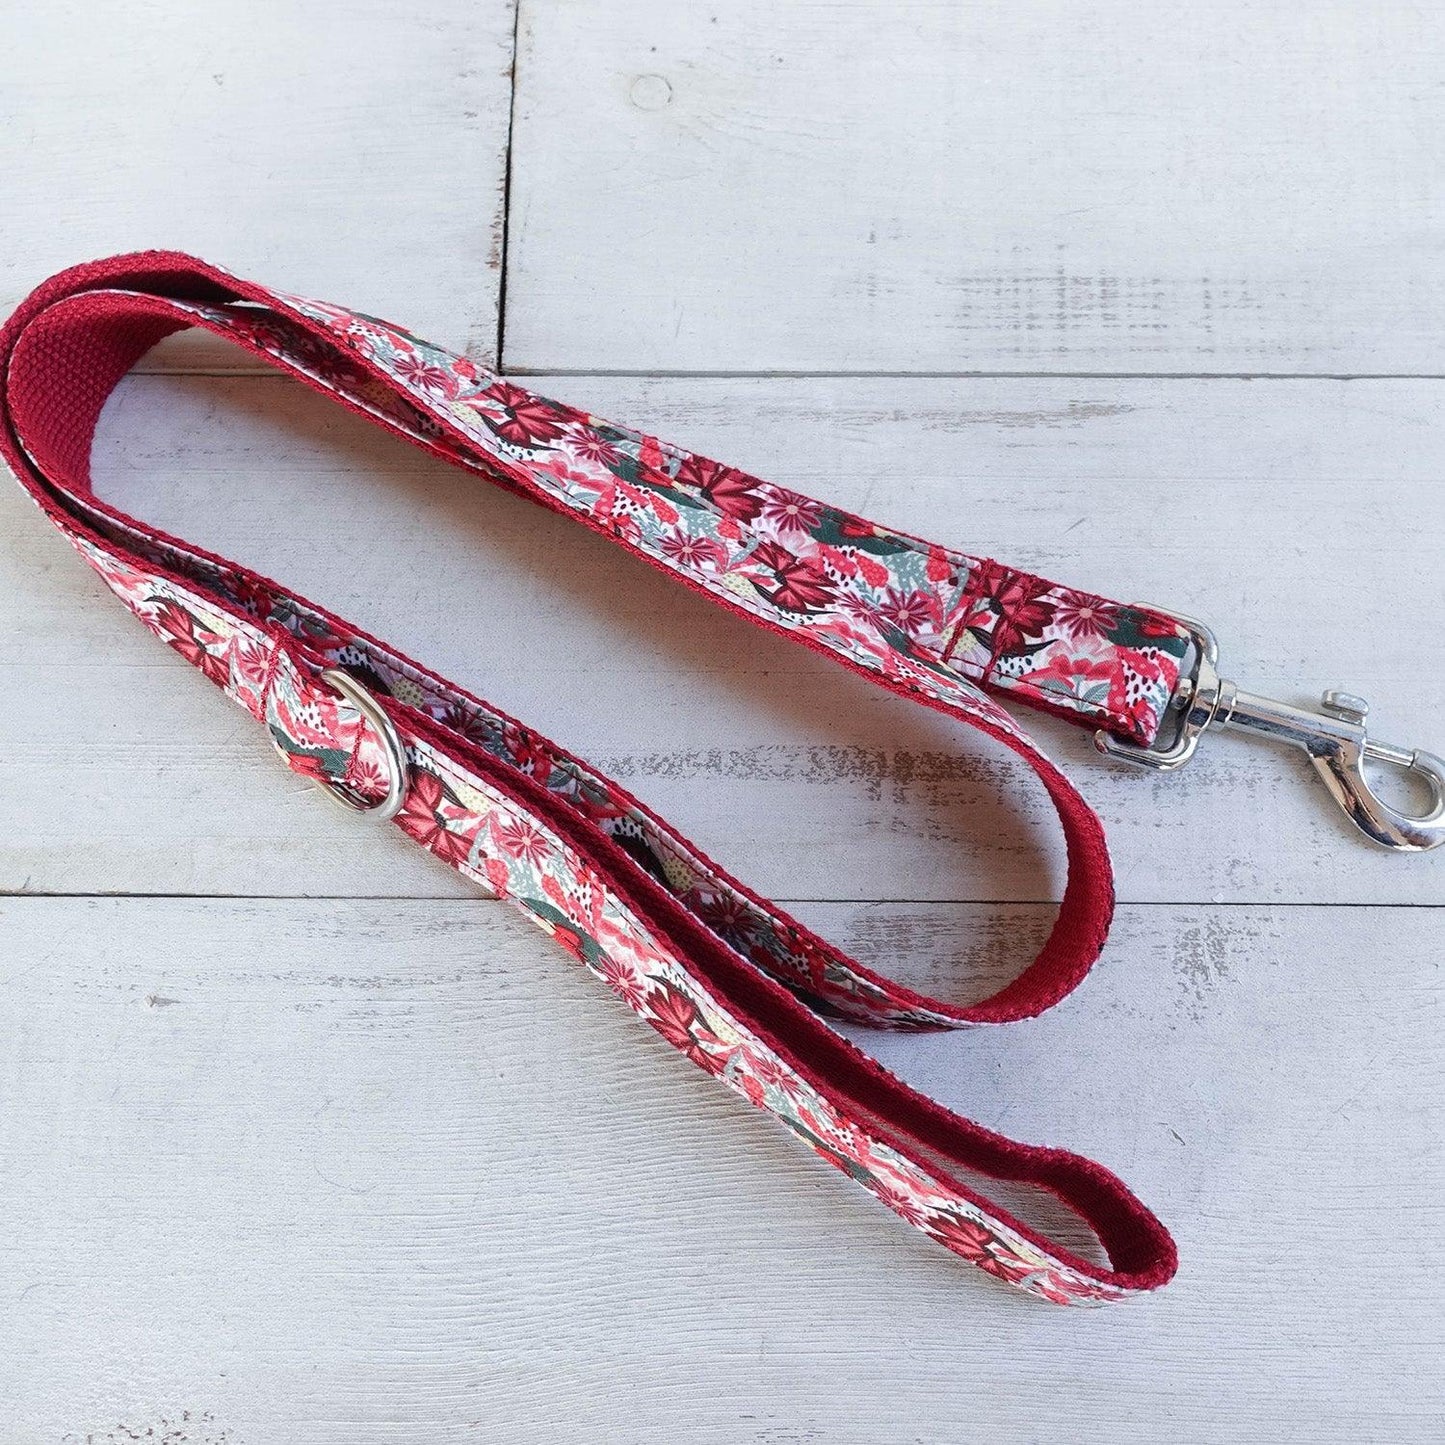 Rosa Red Personalized Dog Collar Set - iTalkPet